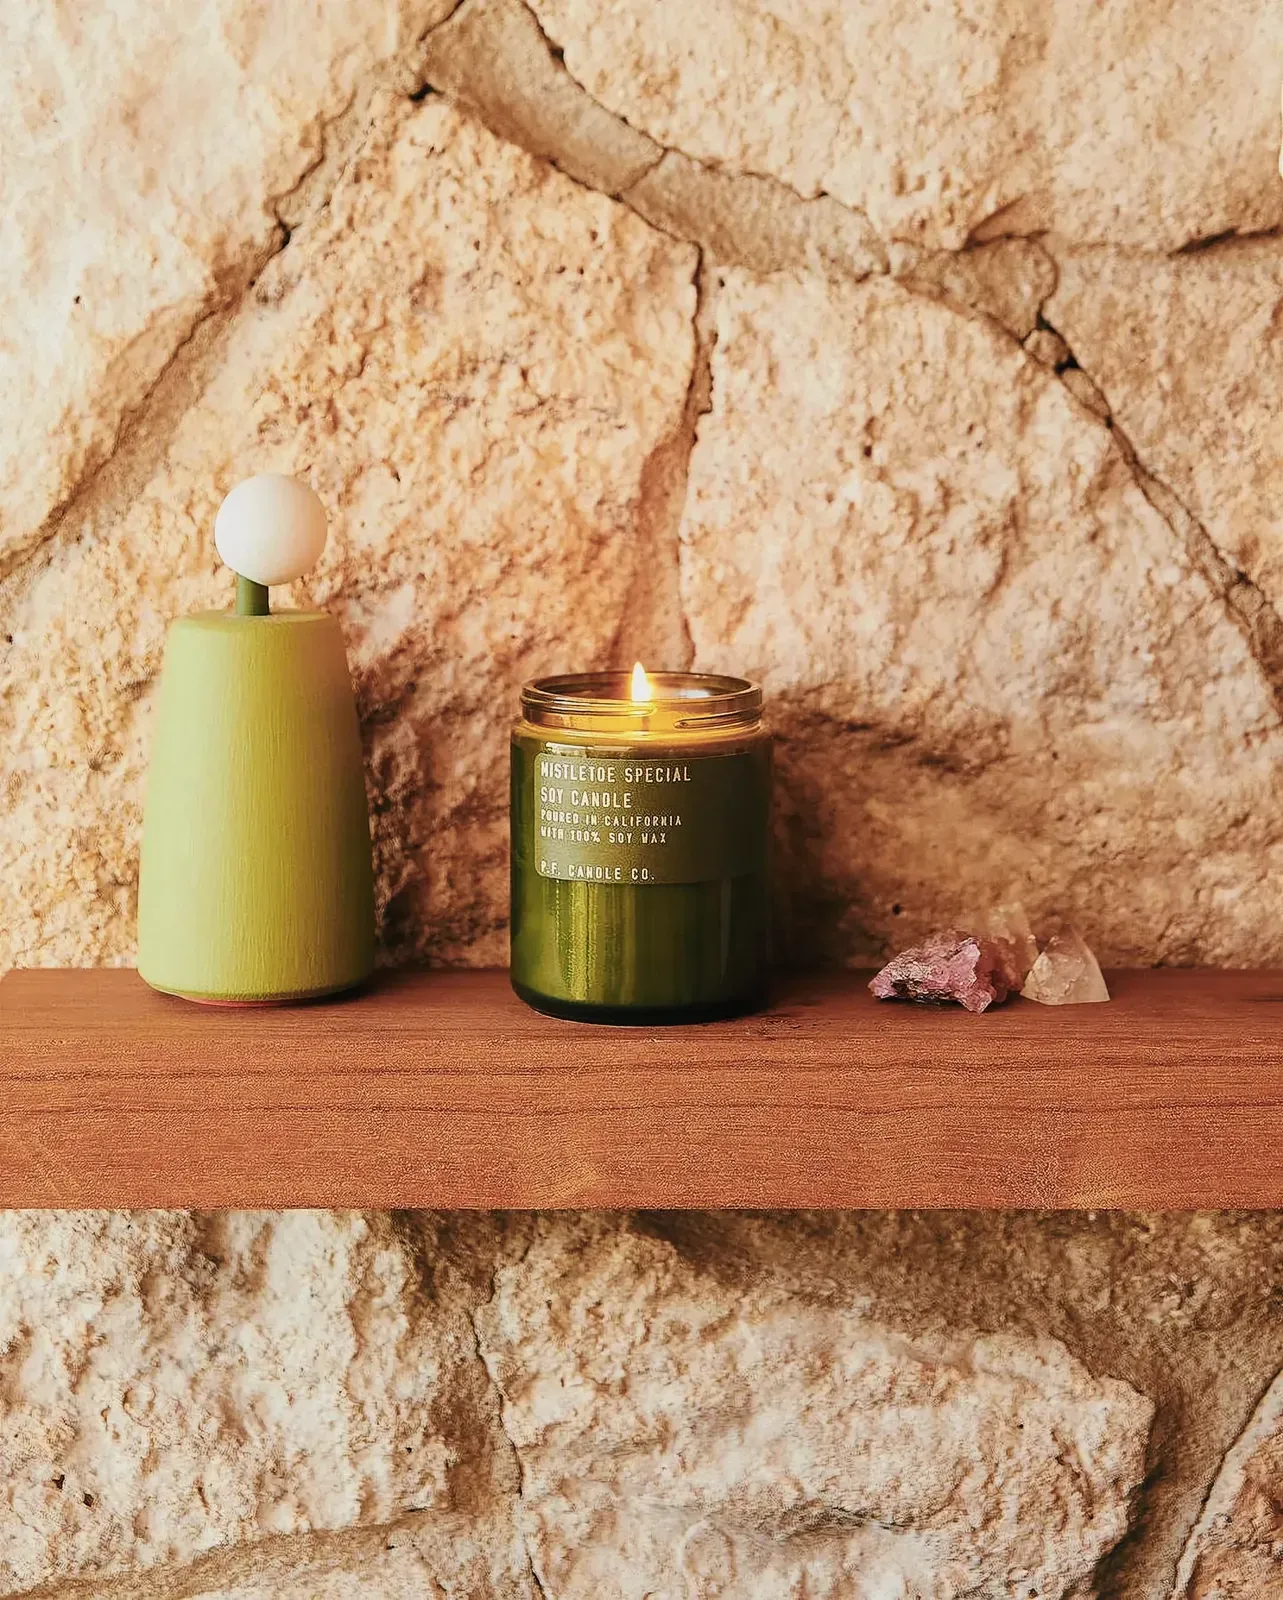 Candles on a wooden shelf with rustic stone wall background